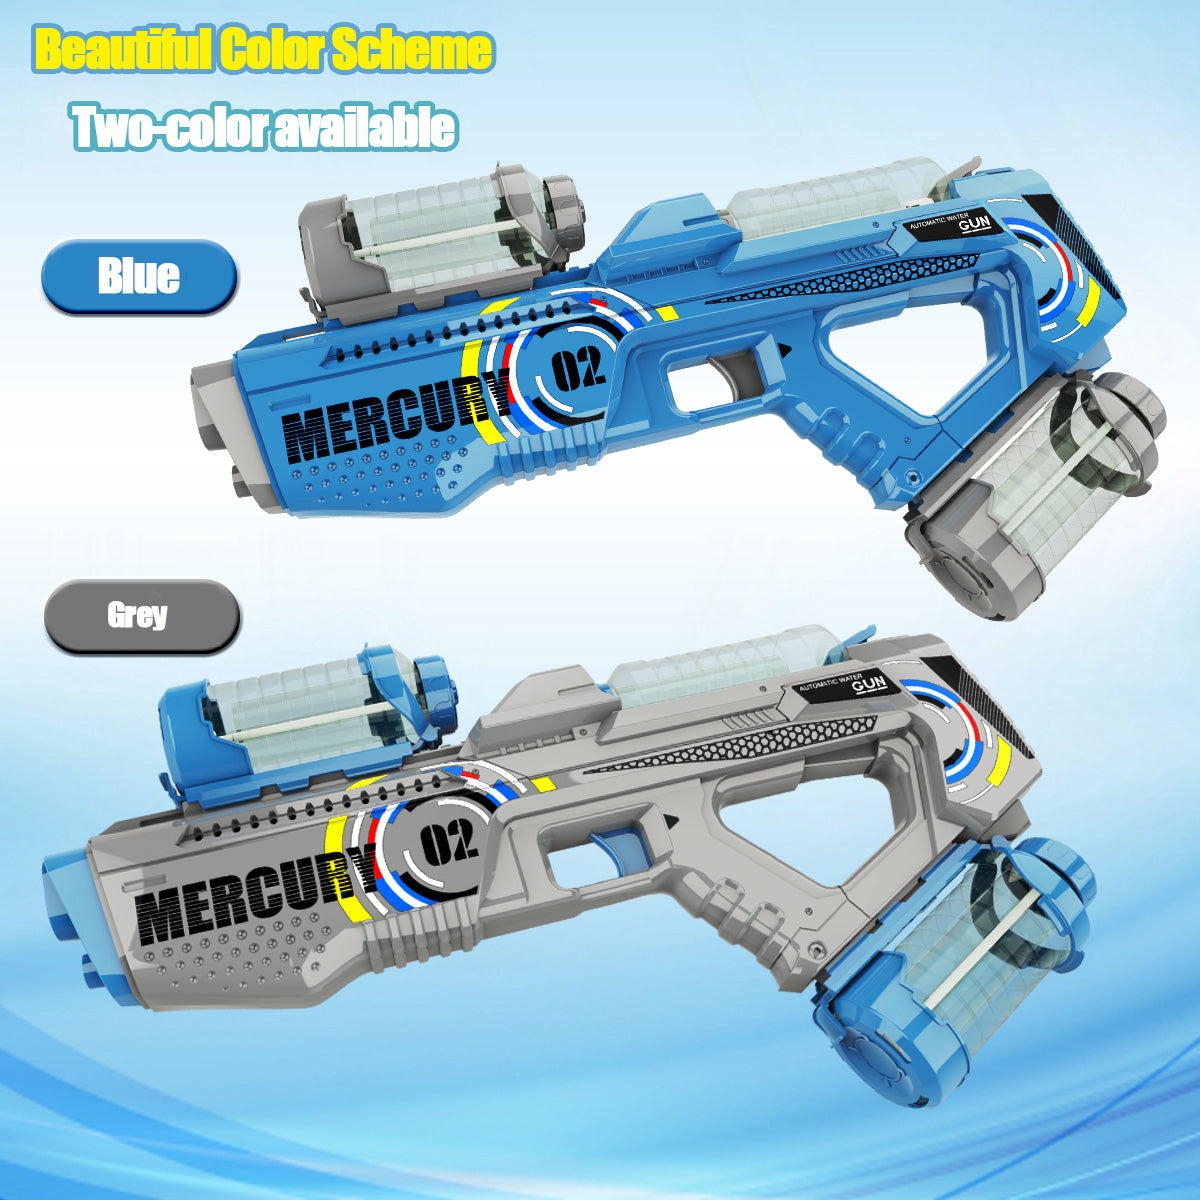 Summer Fully Automatic Electric Water Gun with Light